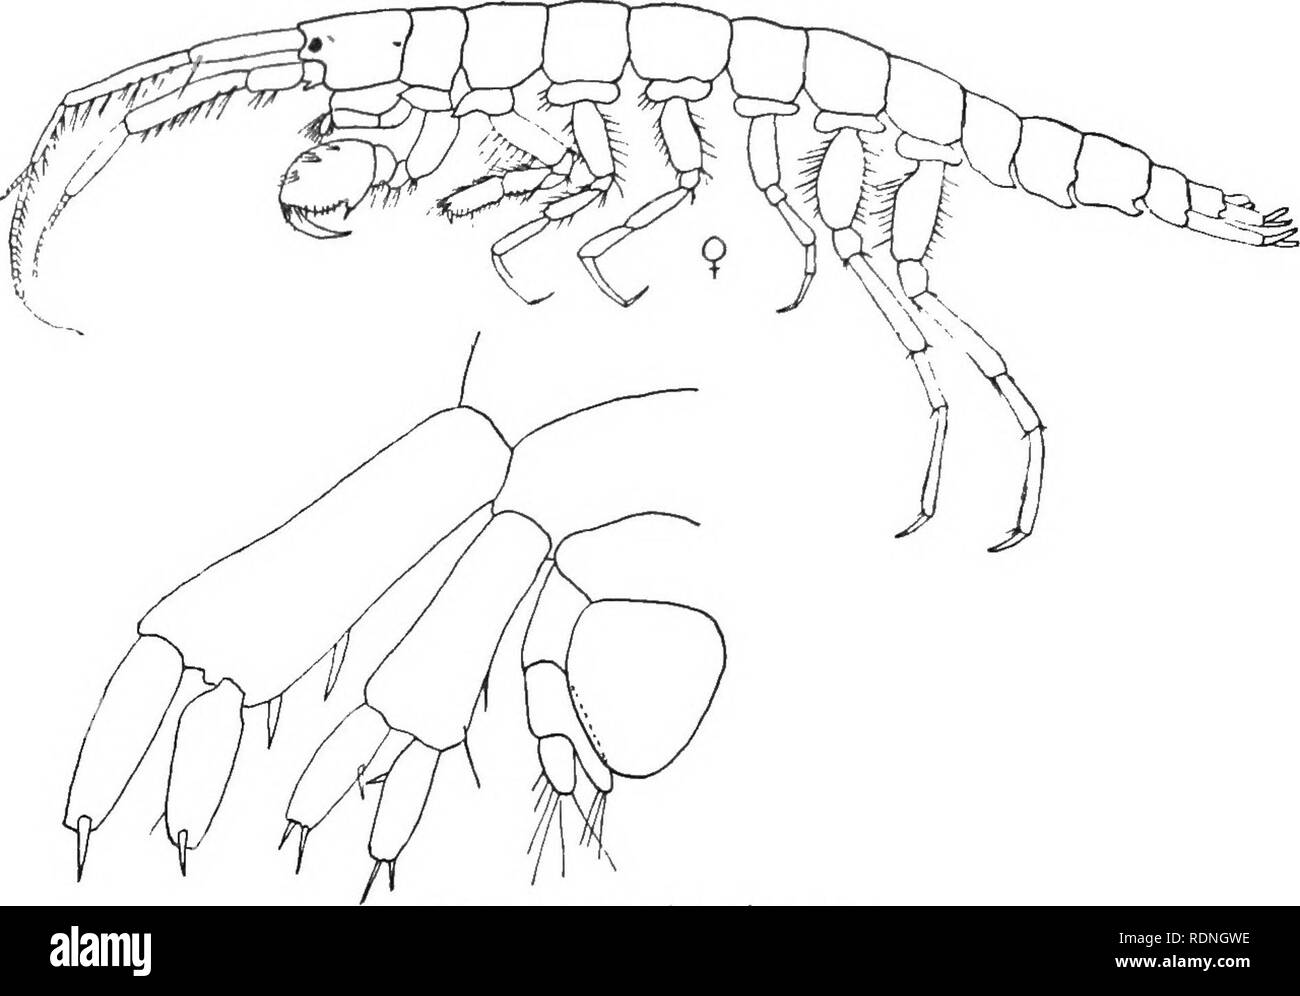 . The Arthrostraca of Connecticut. Malacostraca. 166 CONNECTICUT GEOL. AND NAT. HIST. SURVEY. [Bull. First pair of gnathopods much stronger than the second; propodus large and broad, subchelate. Pereiopods comparatively slender. Three posterior pairs having basal joint expanded. Last pair of uropods very small with peduncle expanded medially. Telson comparatively large, lamellar, rounded. Unciola irrorata Say.. Fig. so. Unciola irrorata. 1818. Unciola irrorata, Say, Jour. Acad. Xat. Sci. Phila., vol. I, pt. 2, p. 389. 1874. Unciola irrorata, Smith, Rep. U. S. Com. Fish., 1871-2, p. 567, pi. 4, Stock Photo